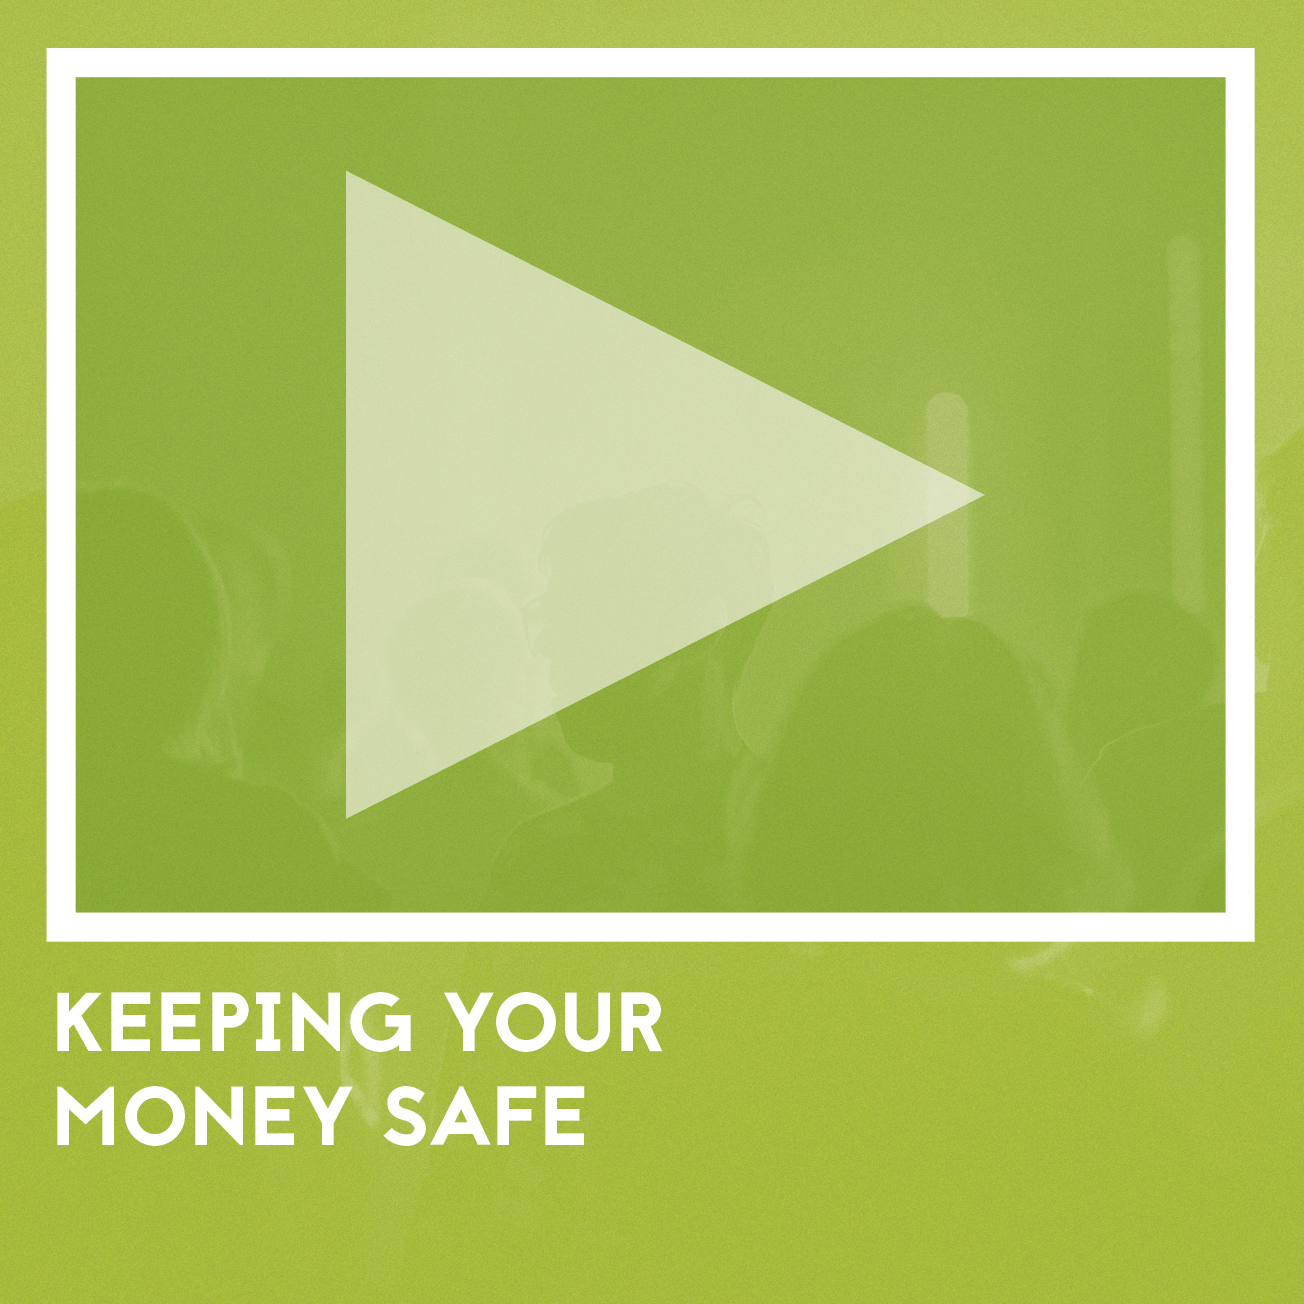 Keeping your money safe